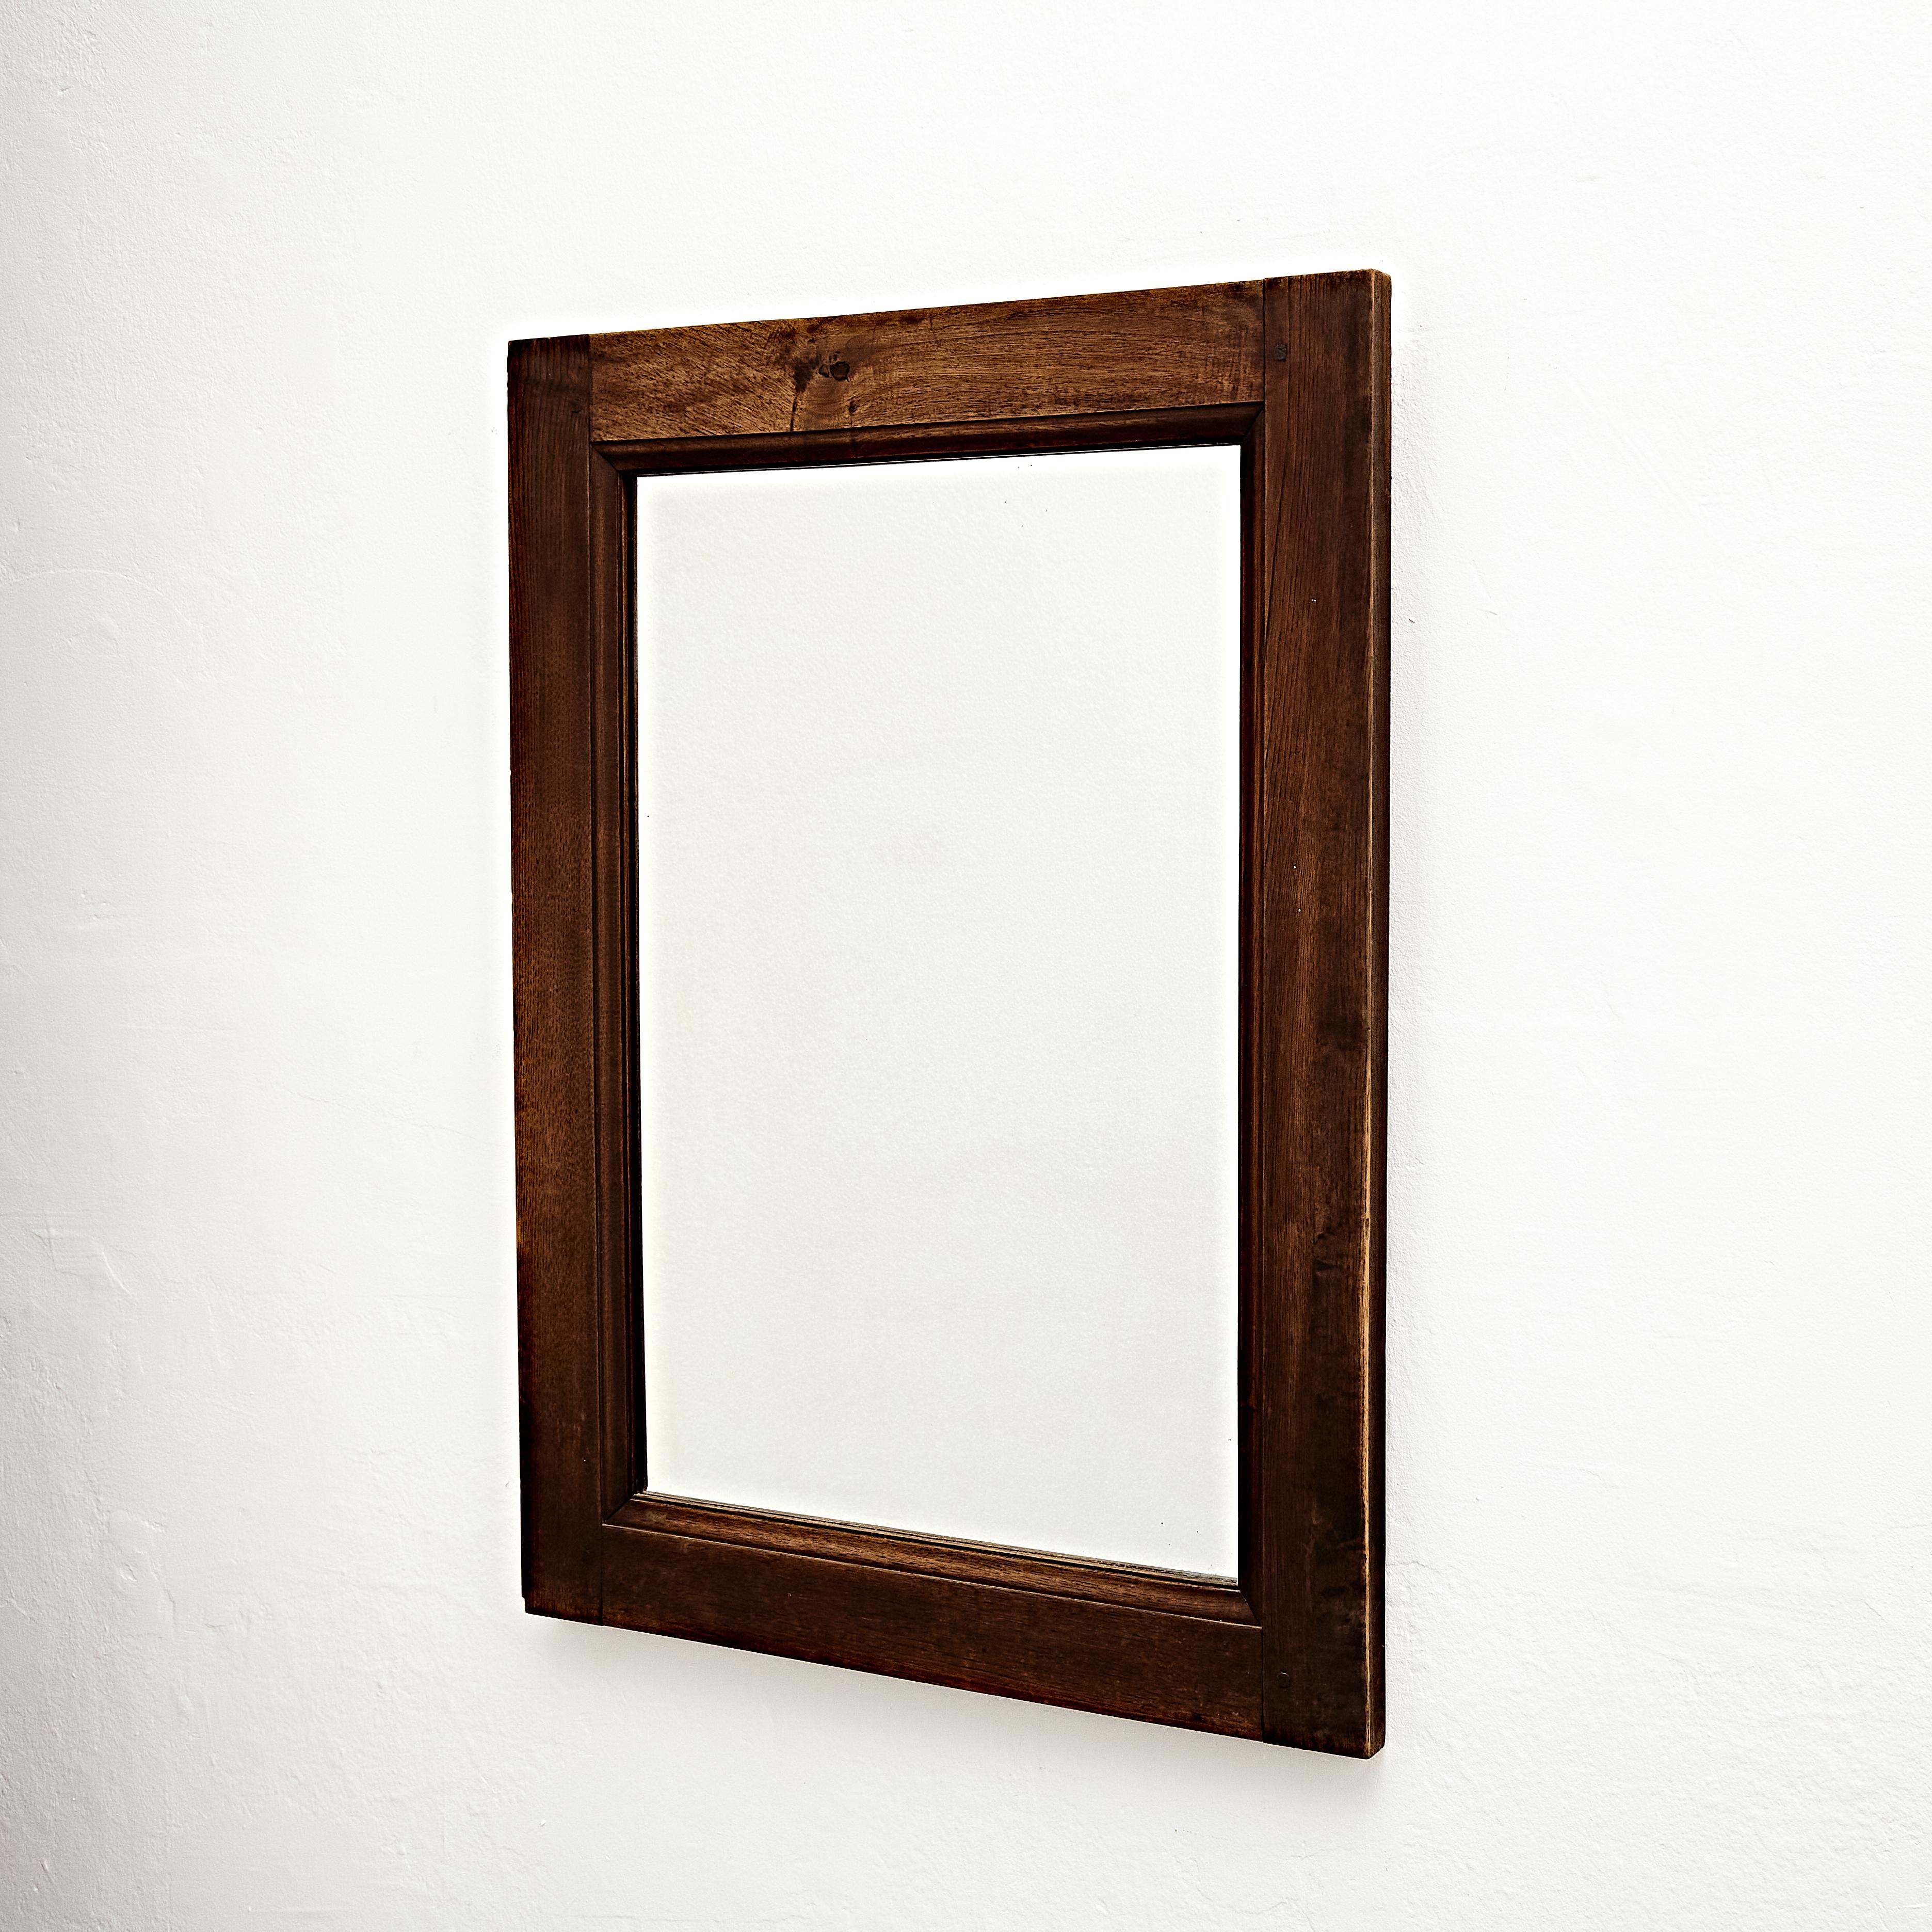 French Mid-Century Modern Rustic Wood Mirror, circa 1960 For Sale